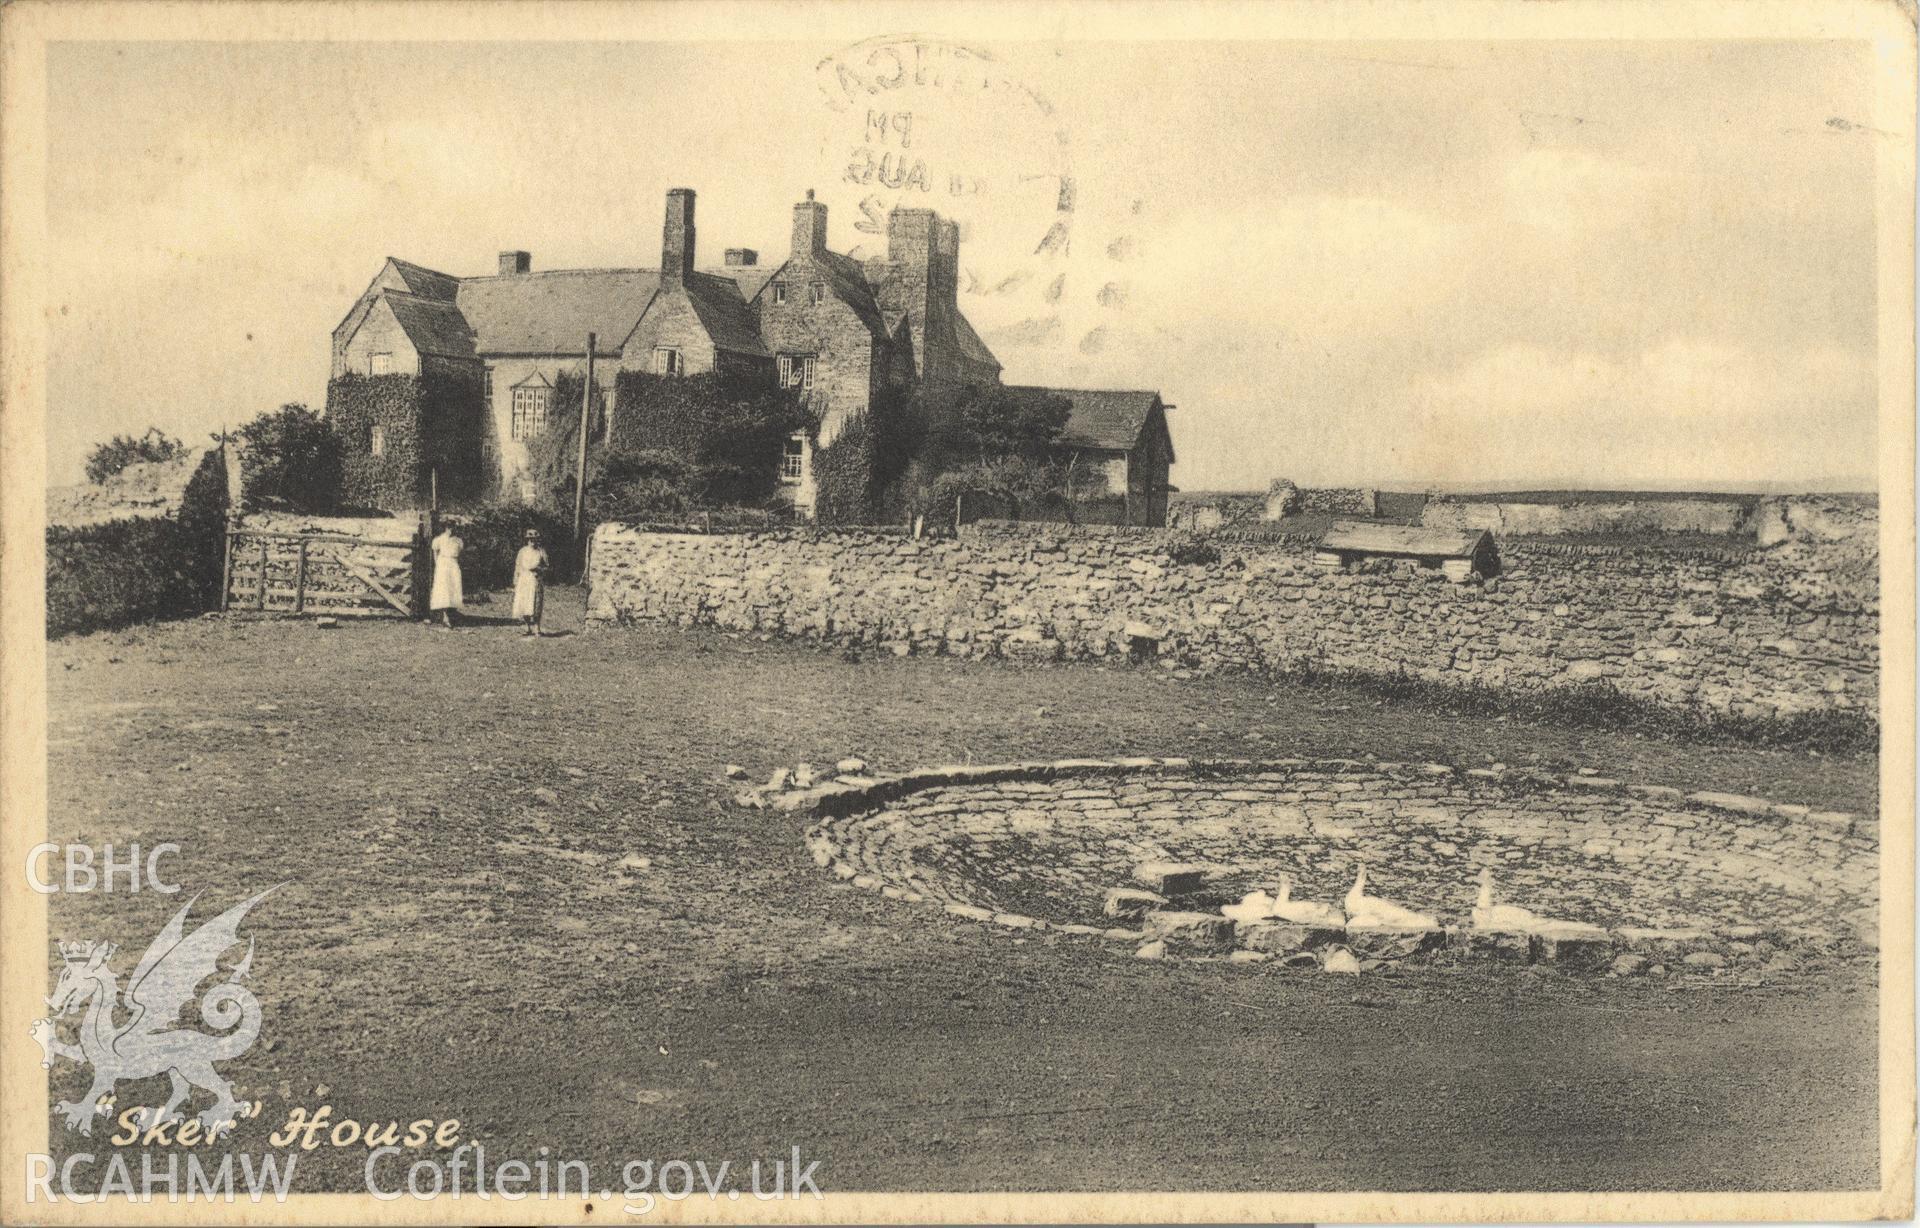 Digitised postcard image of Sker House, Porthcawl, including two women and stone-lined dewpond, I.G. Llewellyn, 4 John Street, Porthcawl. Produced by Parks and Gardens Data Services, from an original item in the Peter Davis Collection at Parks and Gardens UK. We hold only web-resolution images of this collection, suitable for viewing on screen and for research purposes only. We do not hold the original images, or publication quality scans.